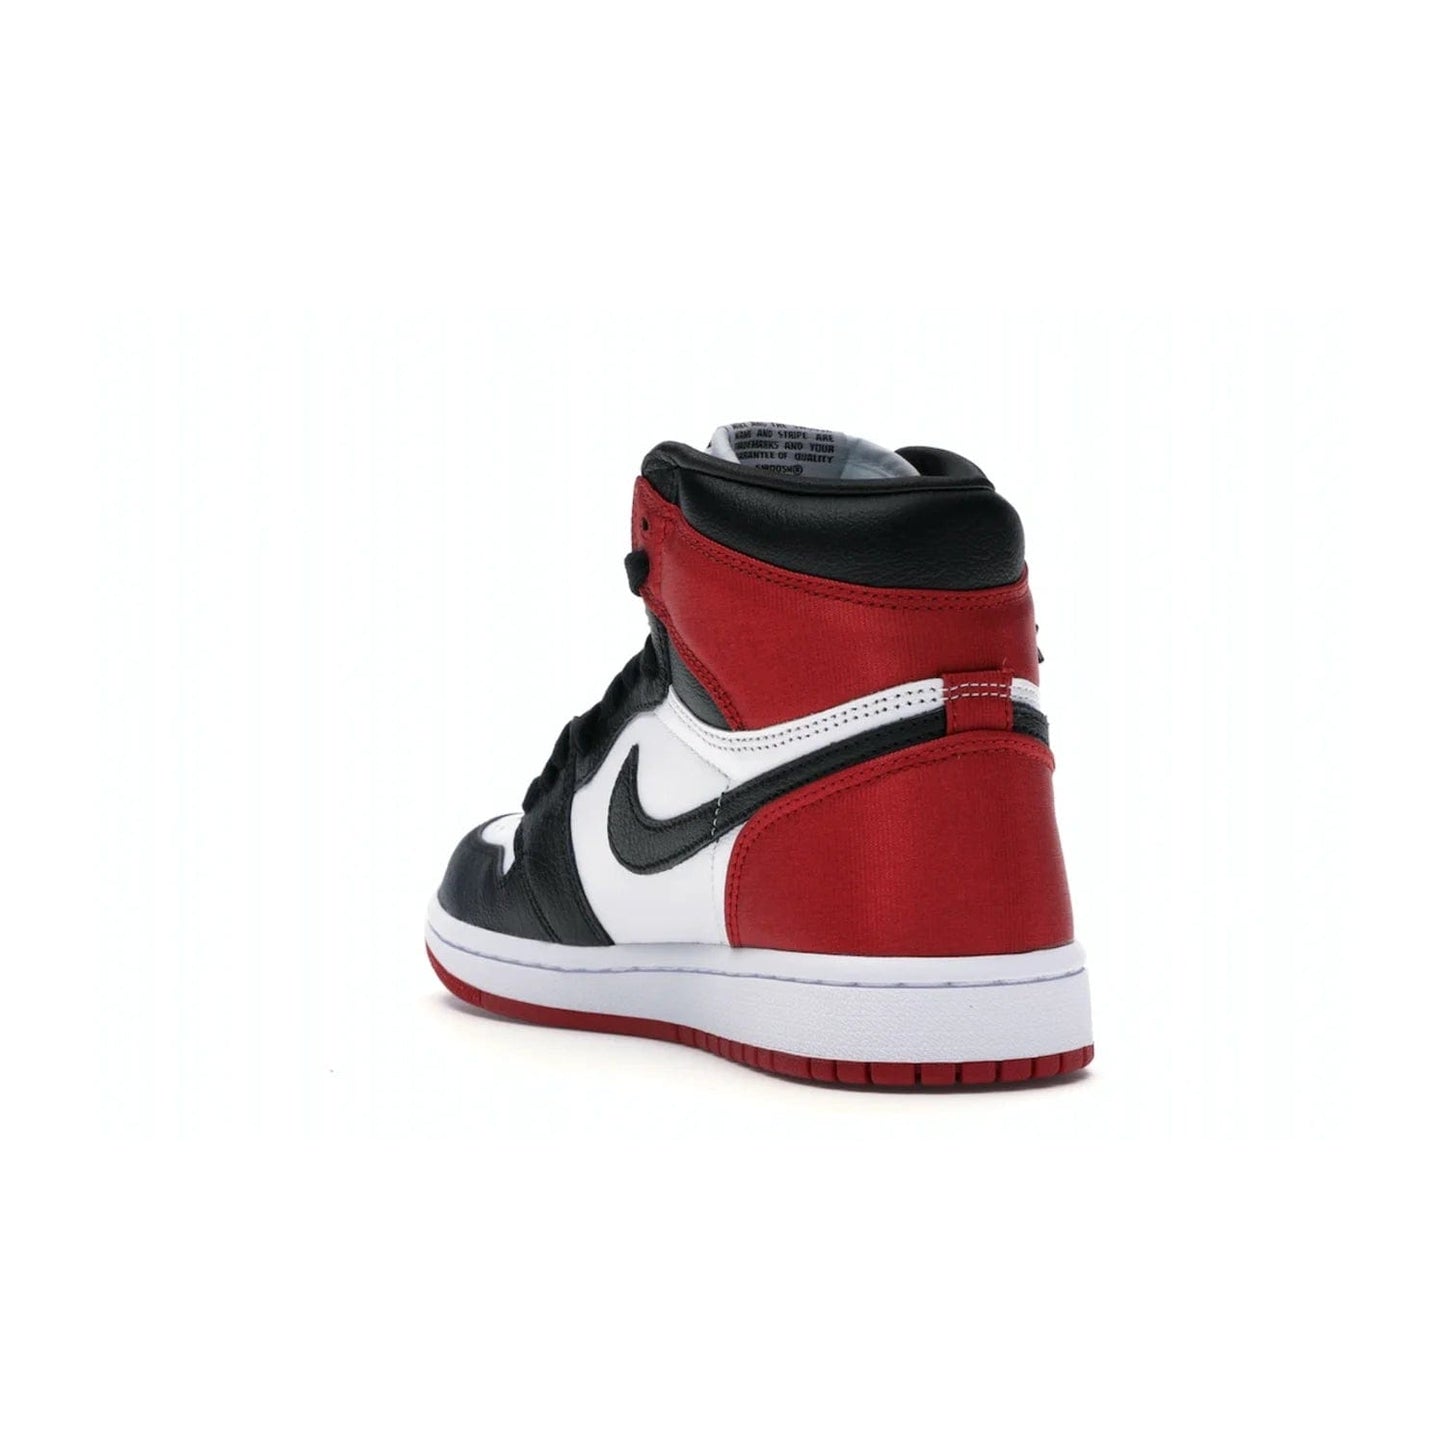 Jordan 1 Retro High Satin Black Toe (Women's) - Image 25 - Only at www.BallersClubKickz.com - Luxurious take on the timeless Air Jordan 1. Features a mix of black leather and satin materials with subtle University Red accents. Elevated look with metal Wings logo on the heel. Released in August 2019.